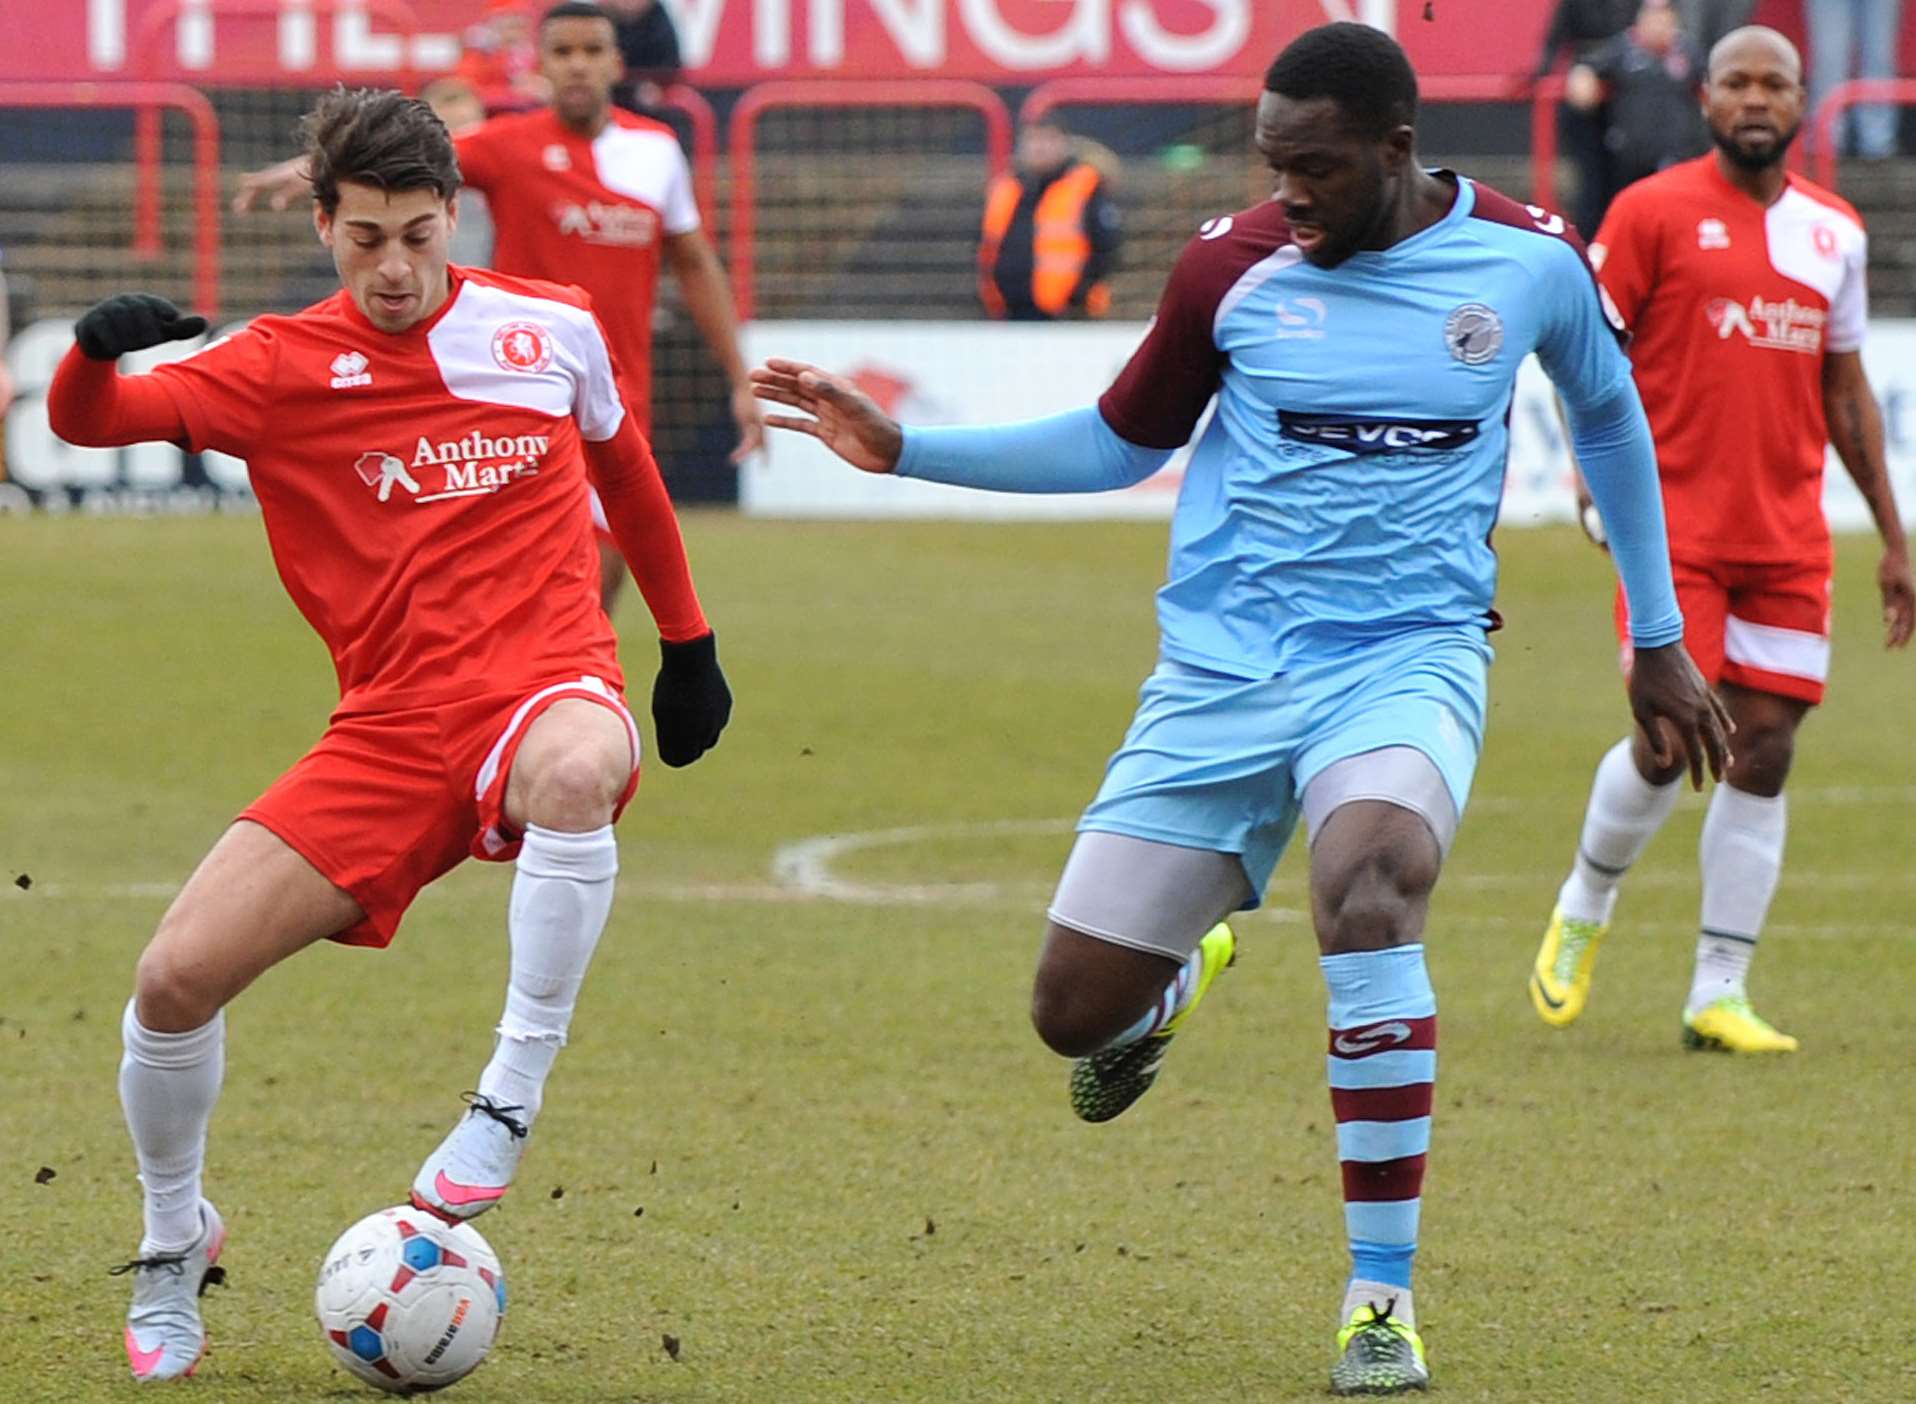 Welling's Scott Kashket in action against Gateshead. Picture: David Brown